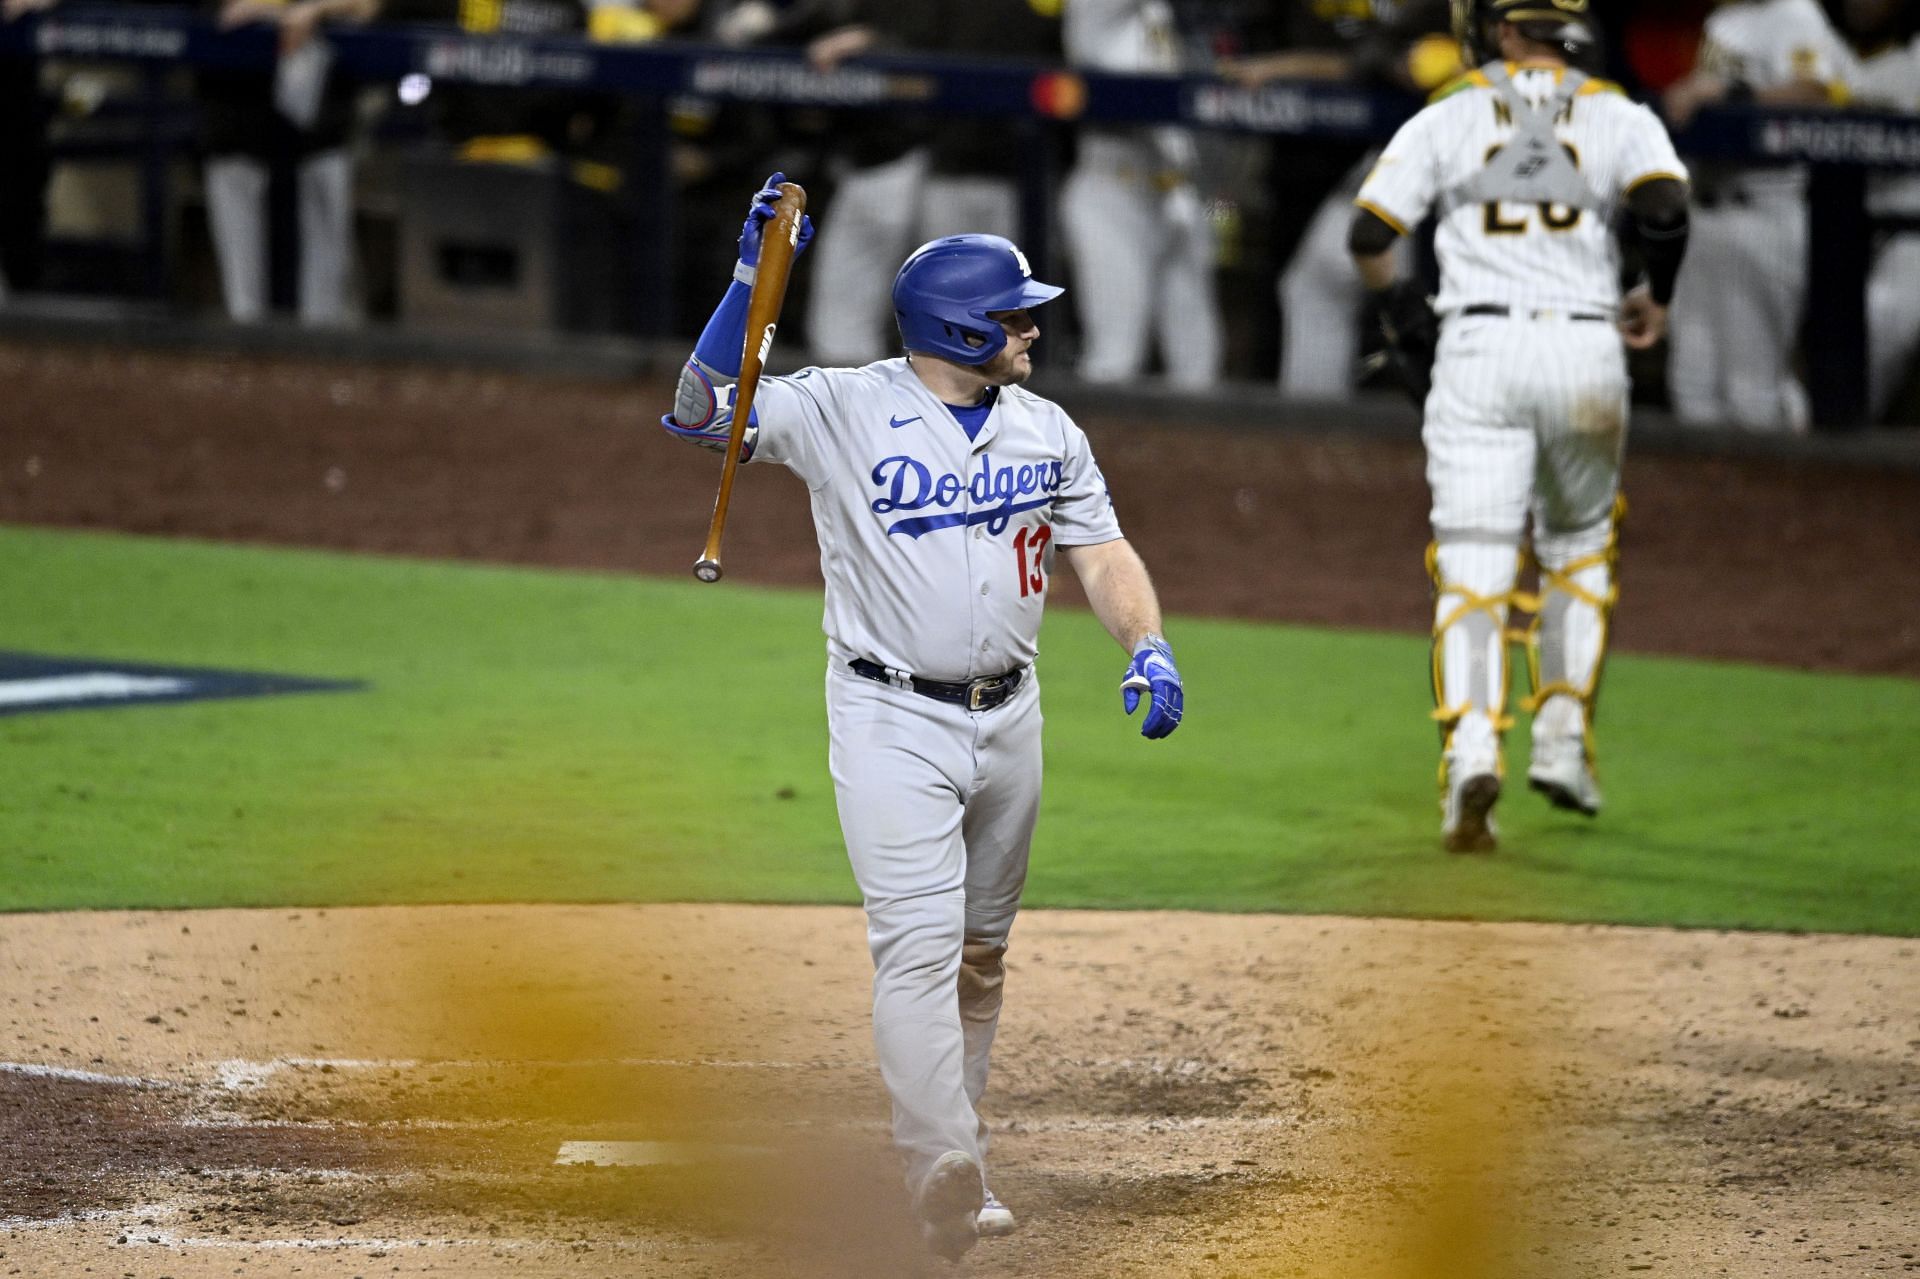 The Los Angeles Dodgers will need a big year from Muncy